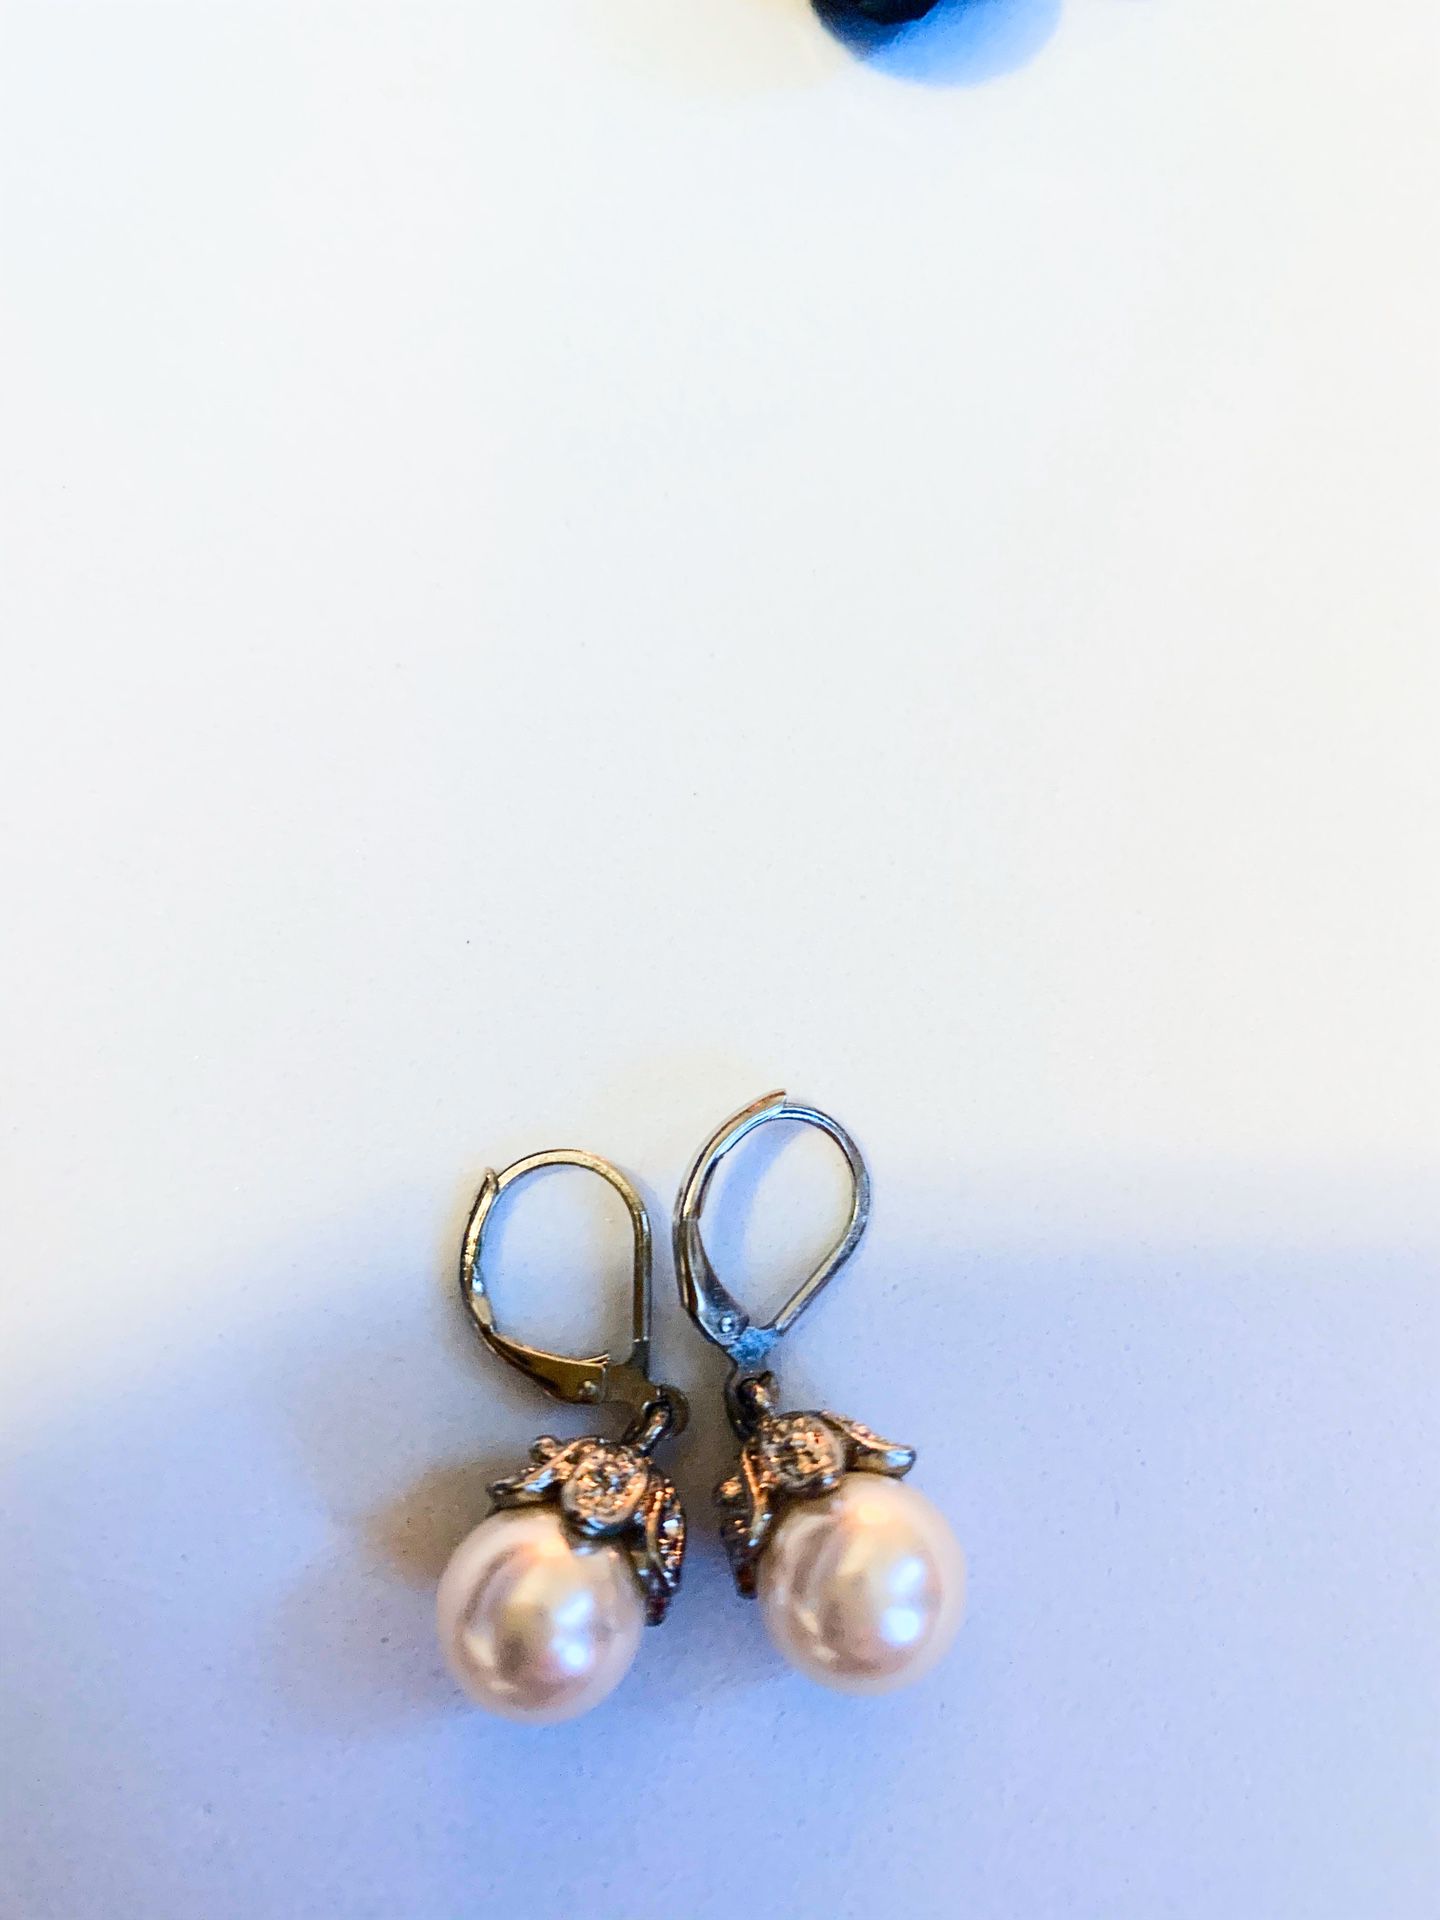 Pearl earrings with small diamonds